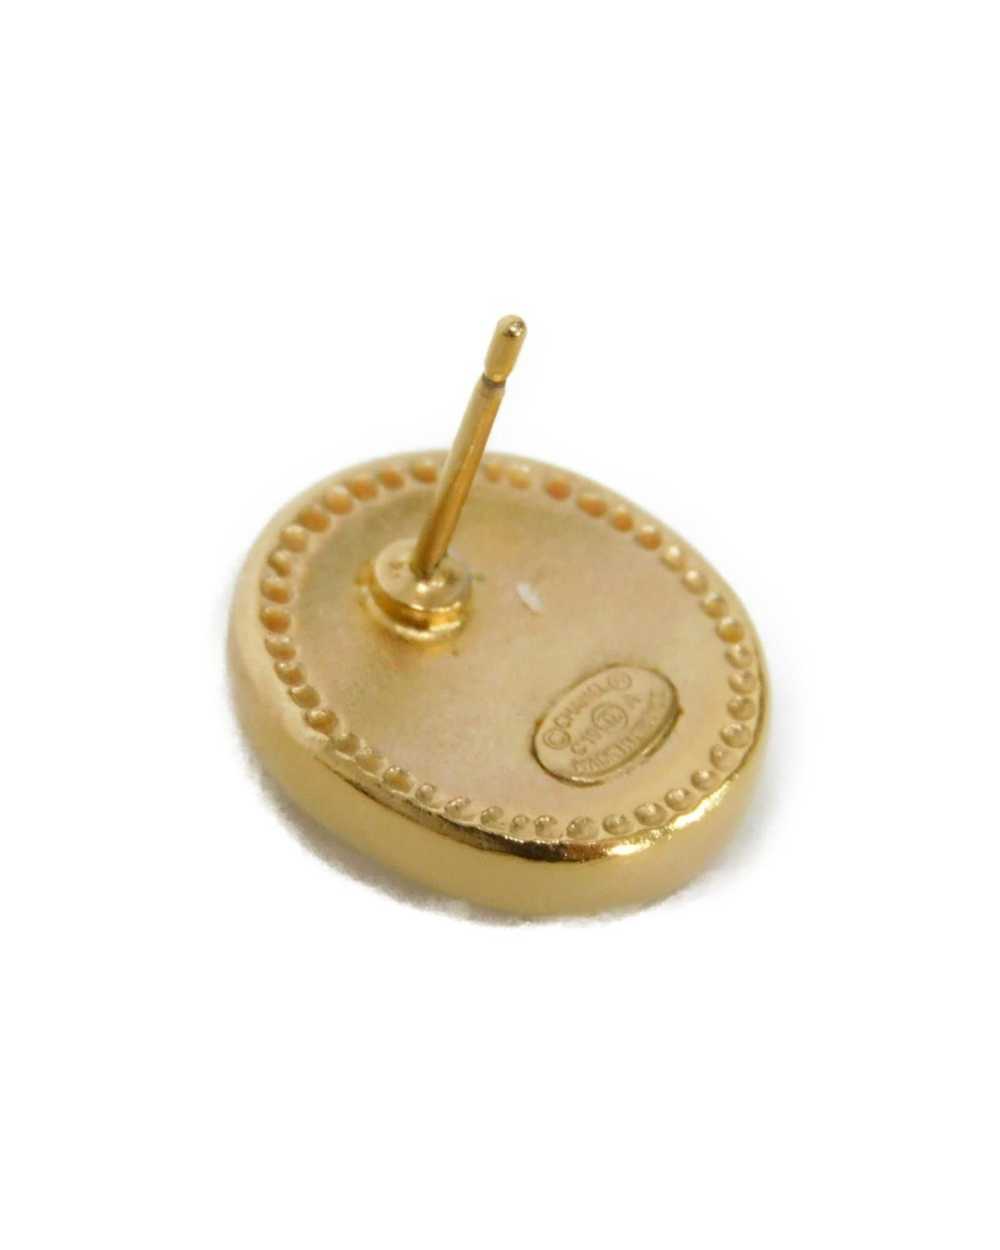 Chanel Champagne Gold Coco Button Earrings - image 10